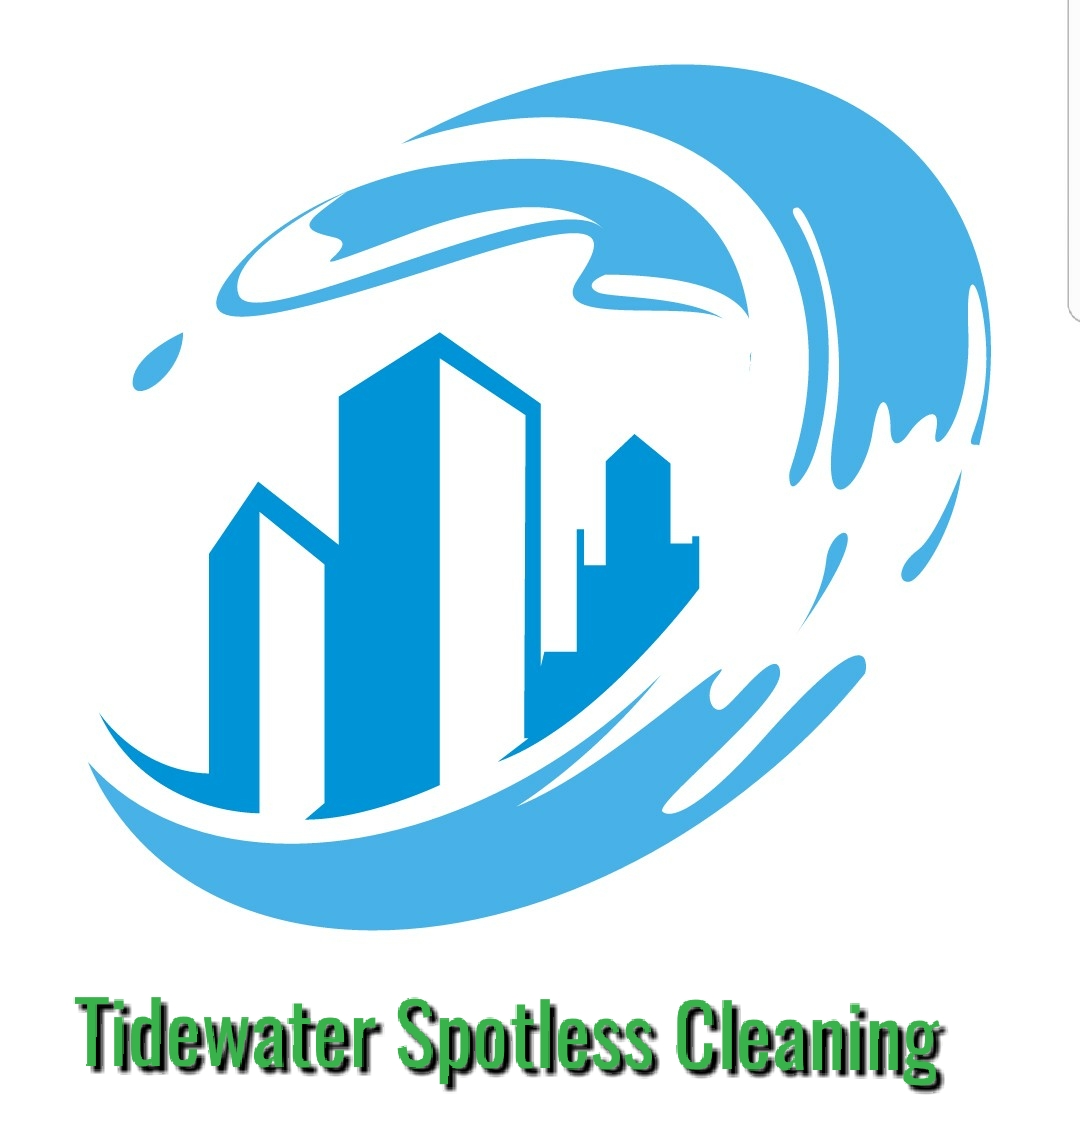 Tidewater Spotless Cleaning Logo